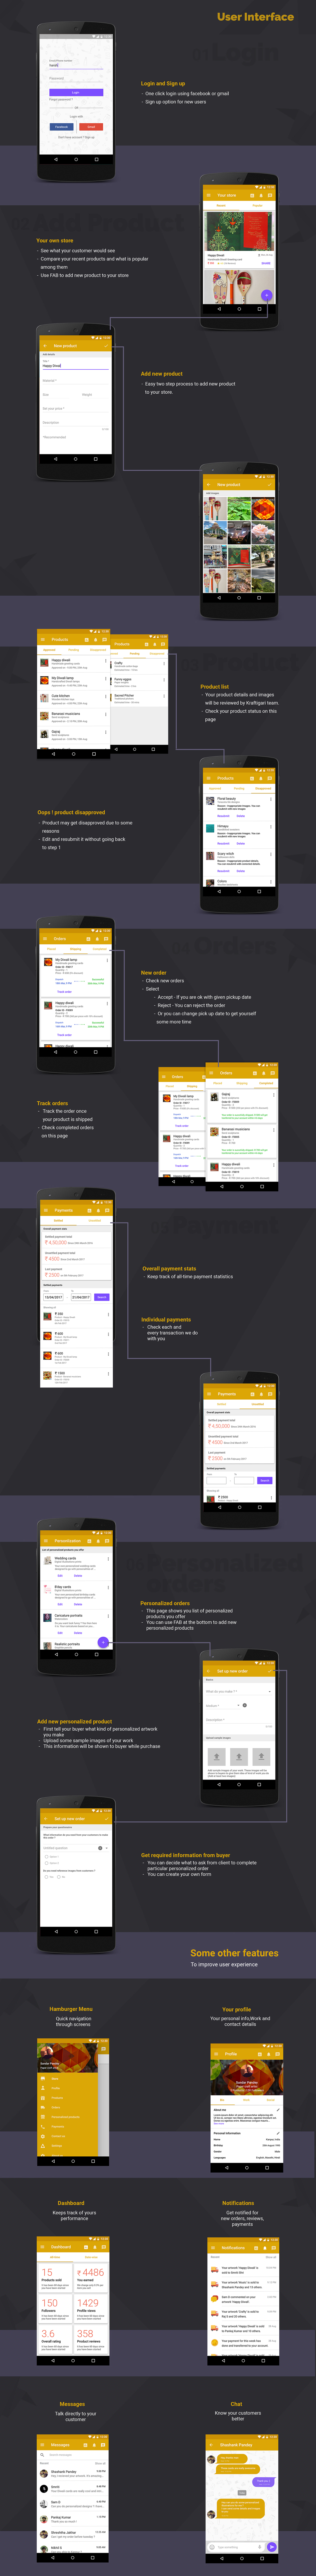 UI/UX Android Application app Interaction design  artisans craft